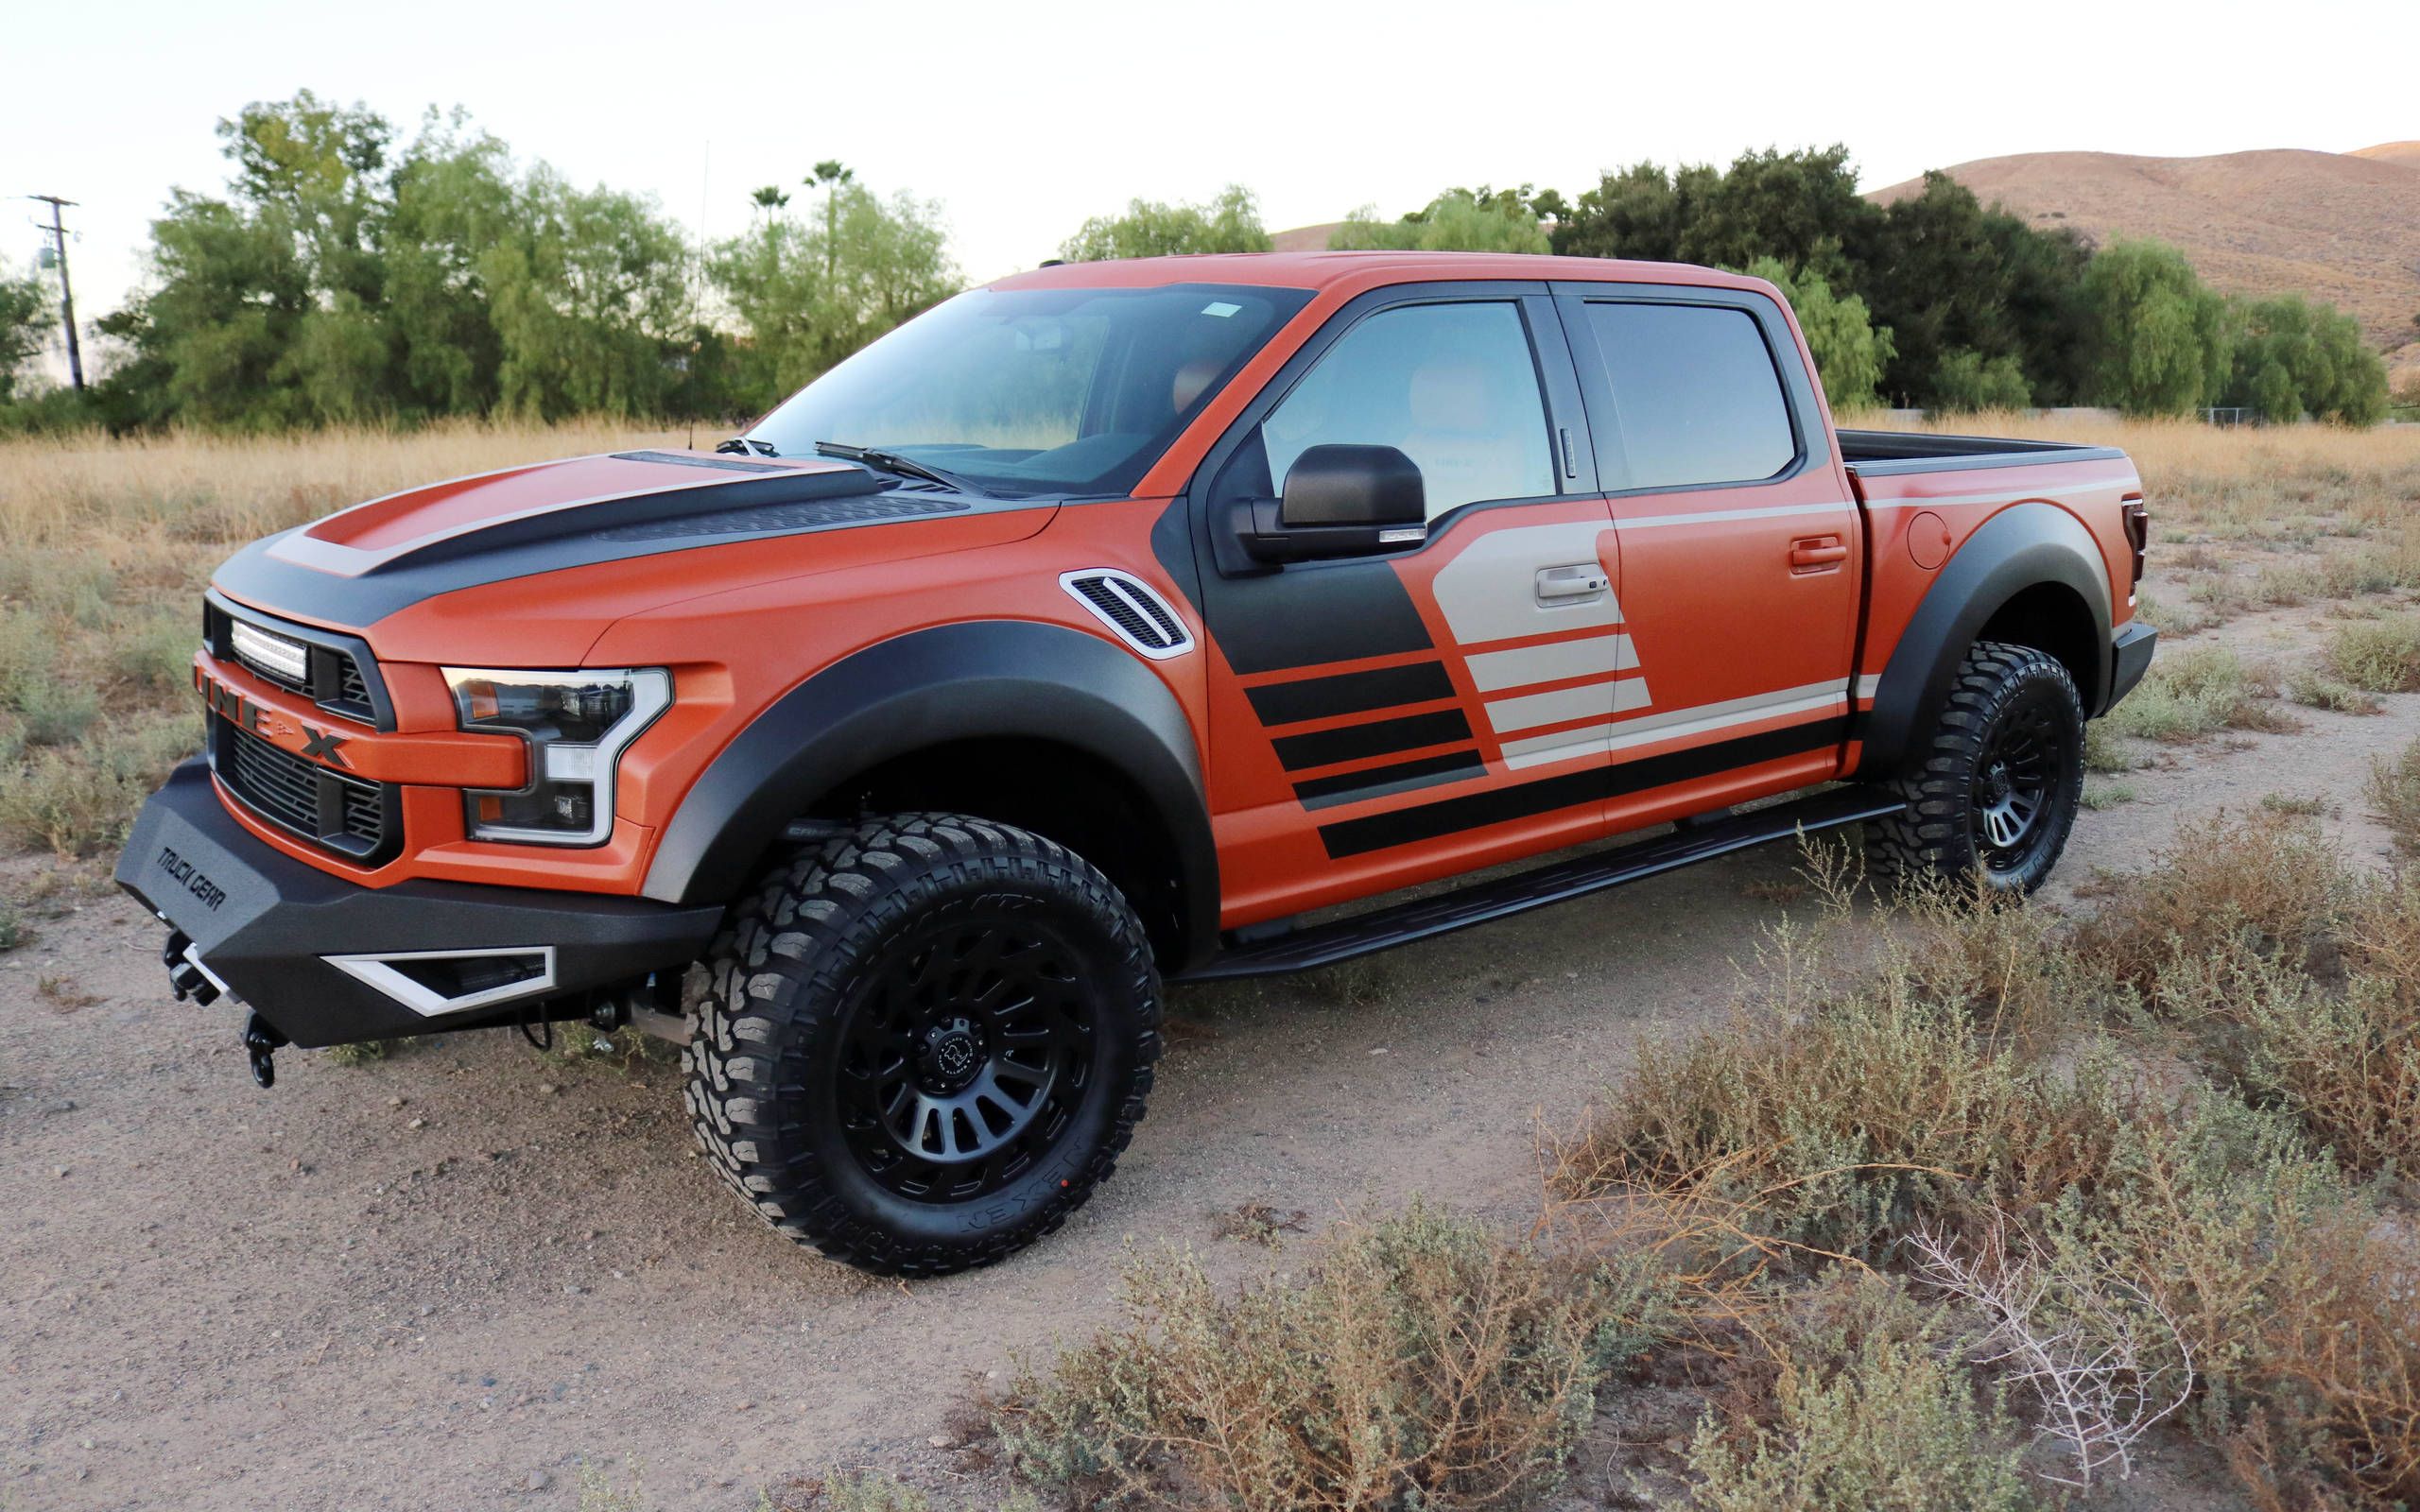 LINE-X teamed up with builder Kenny Pfitzer to build this Raptor show truck...